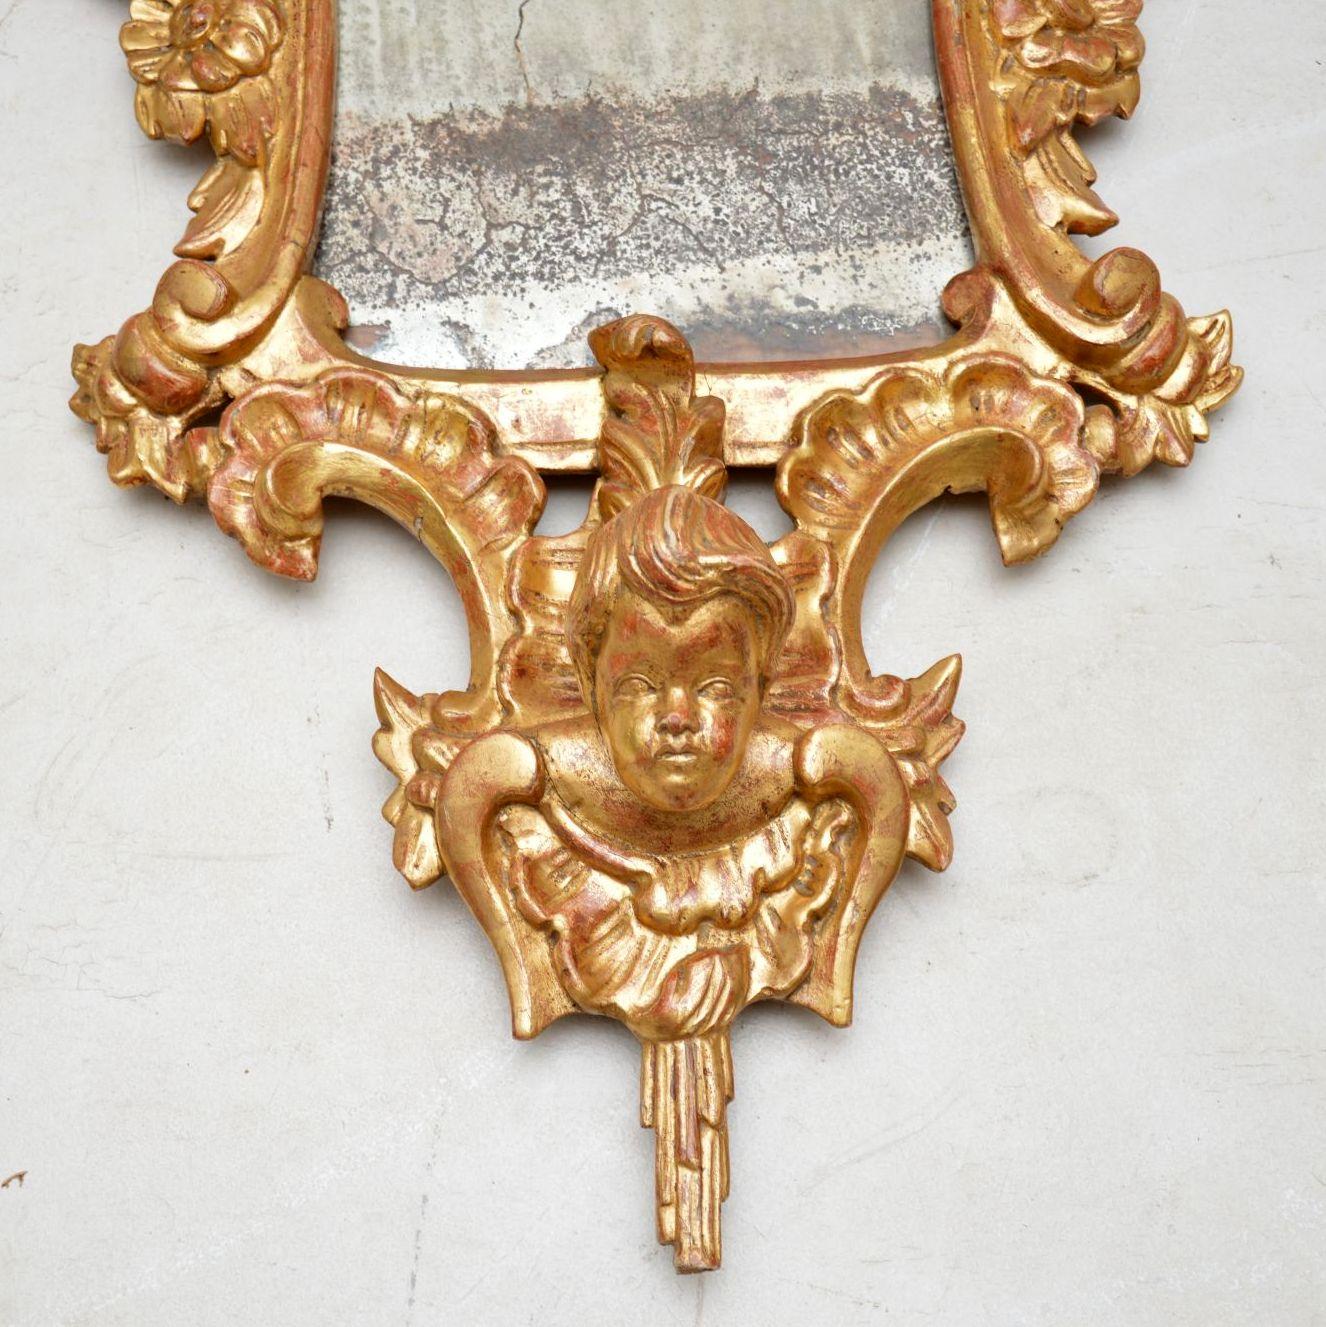 Stunning pair of antique French or Italian giltwood mirrors in very good original condition & with magnificent carved details all-over.

Please enlarge all the images to see the quality of the carvings, the original finish of the gilding & the